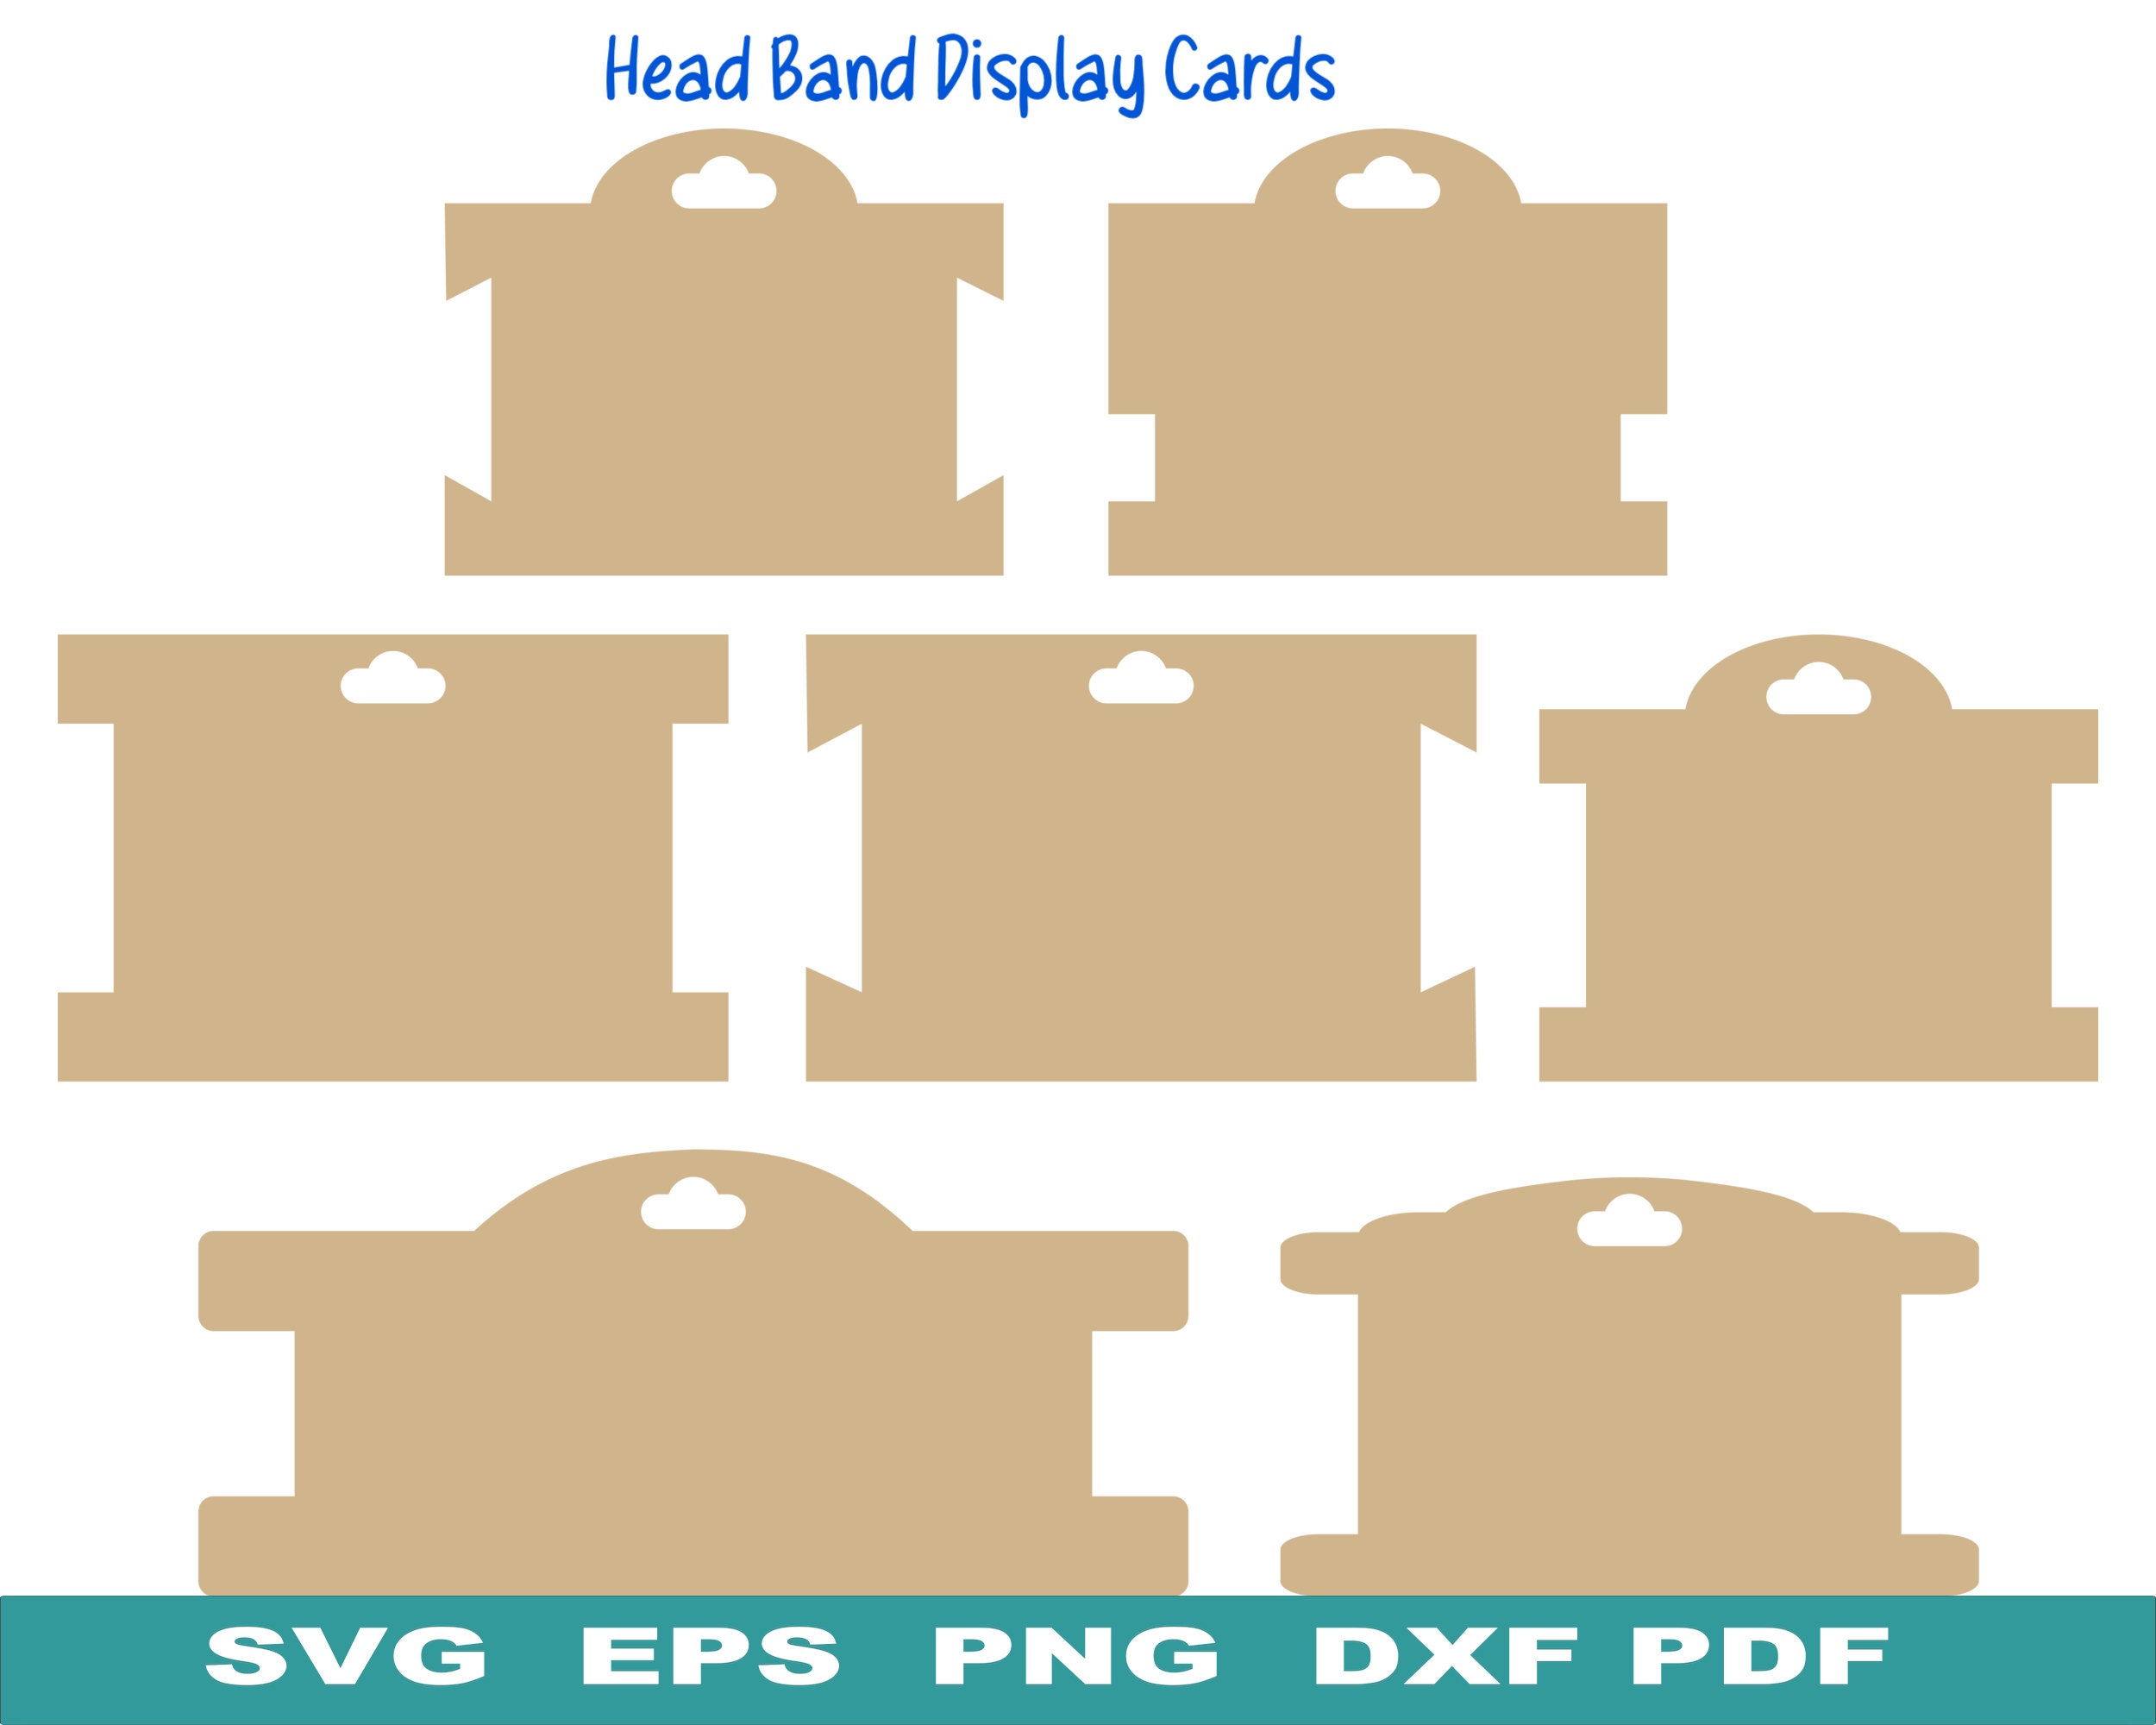 Elastic Band & Hair Tie Organizer - Free SVG and PDF Template Pattern –  PaperZen